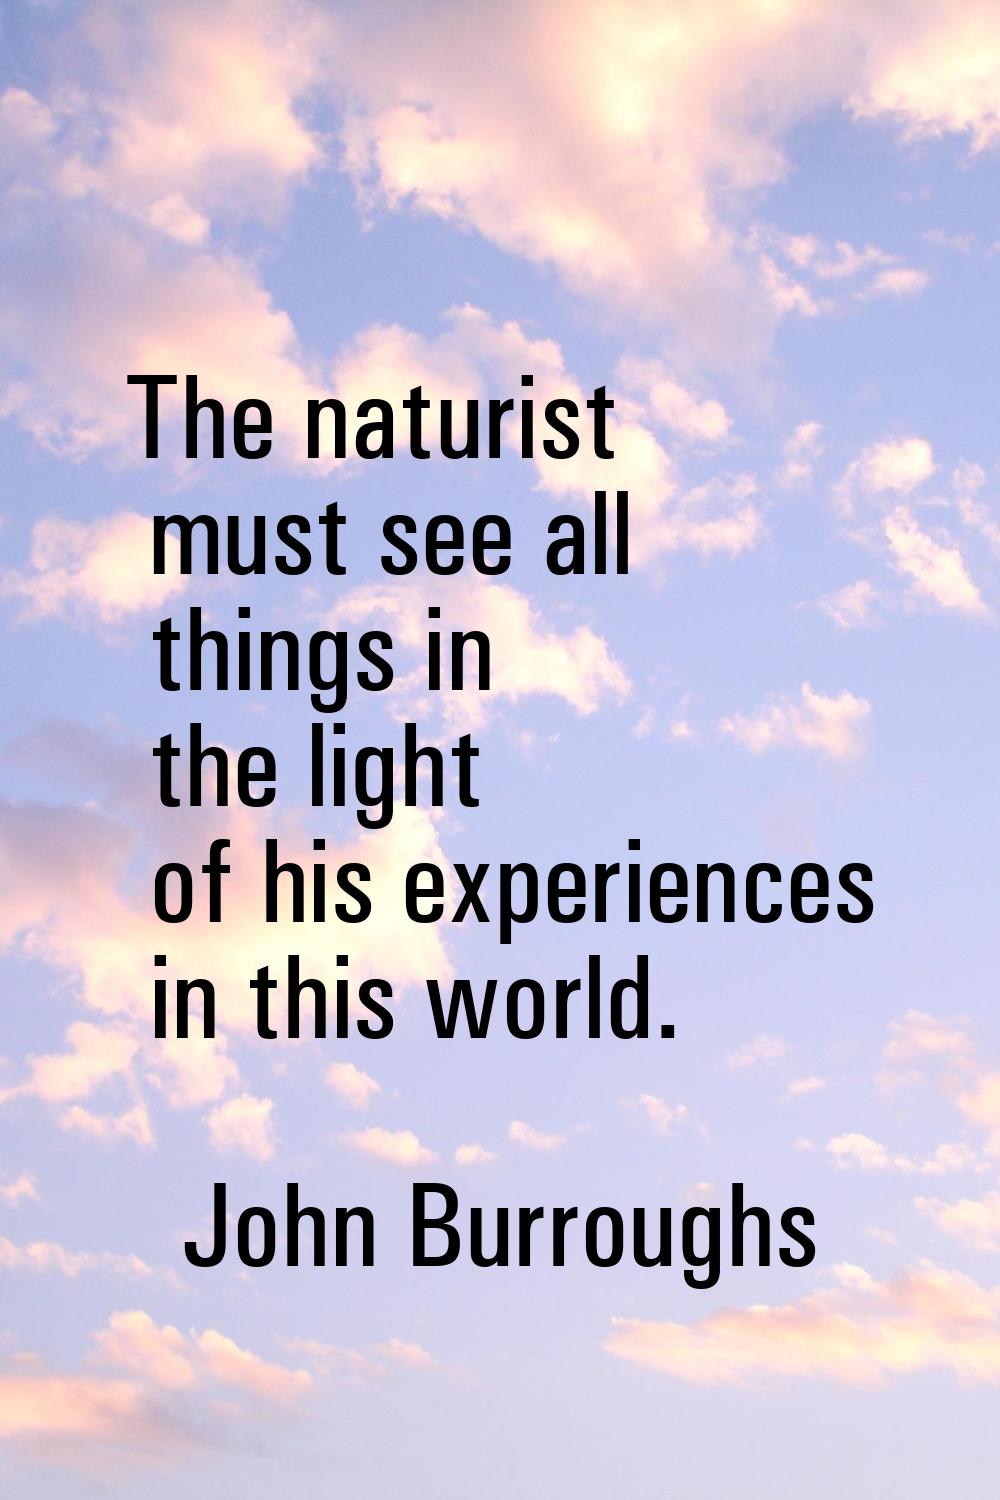 The naturist must see all things in the light of his experiences in this world.